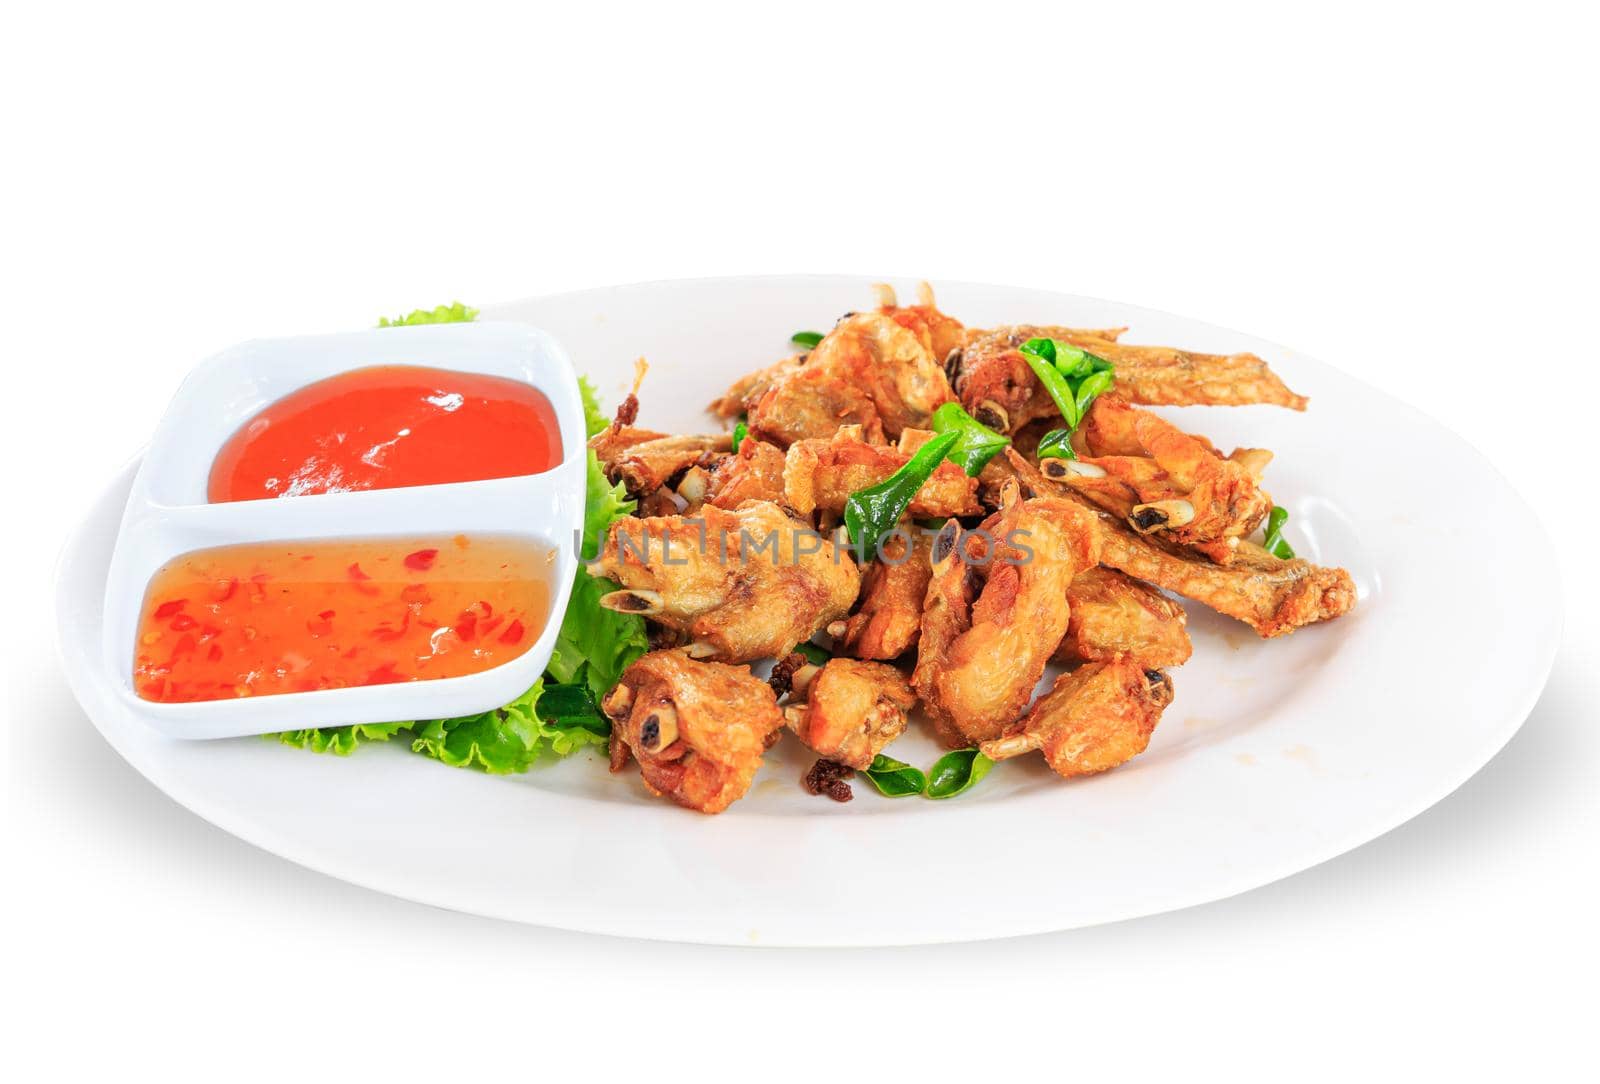 Fried chicken wings with sauce in white plate on white background